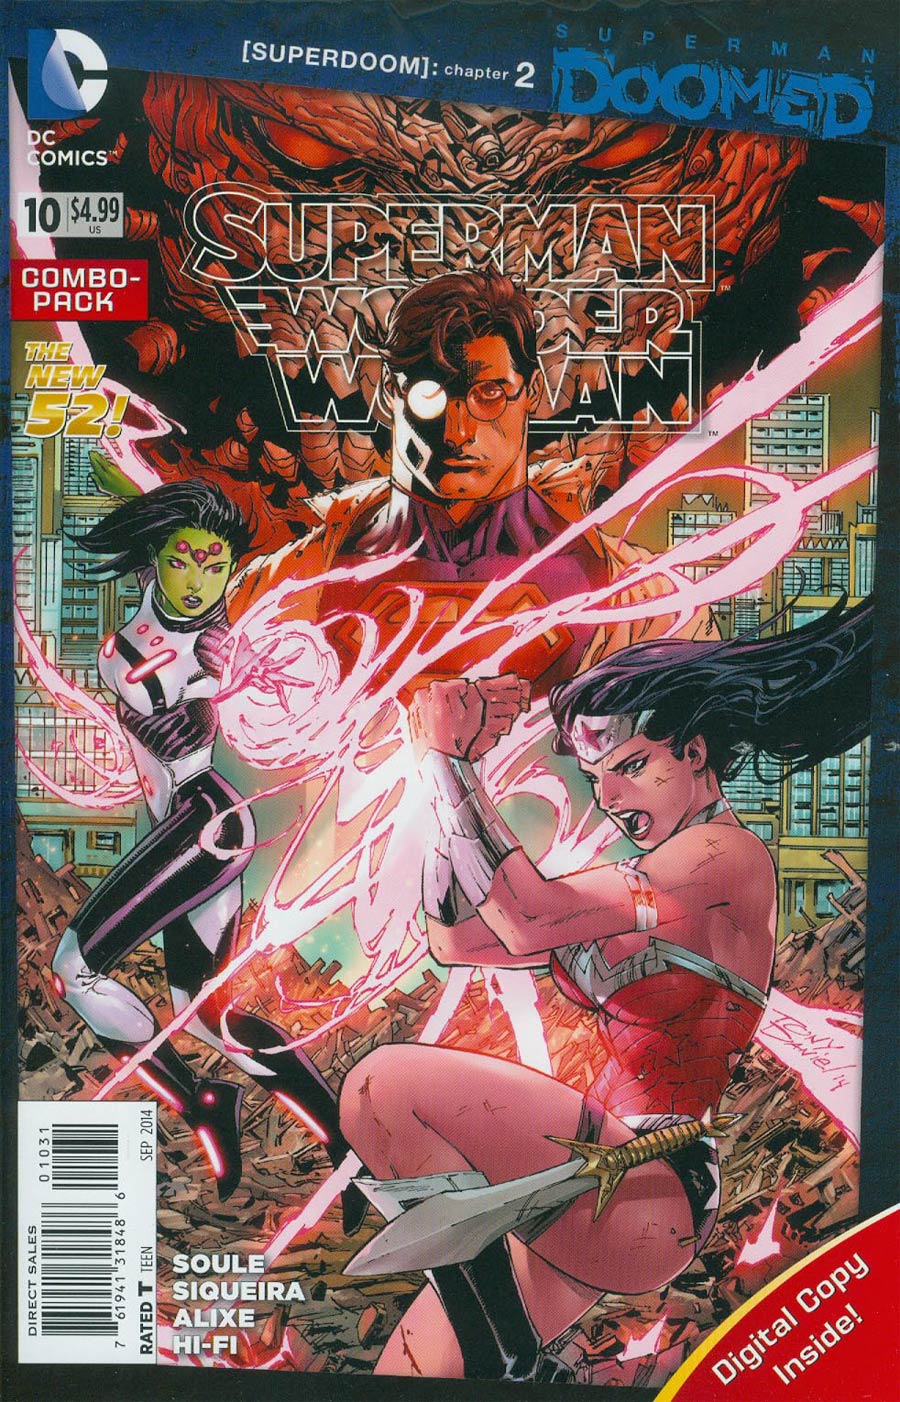 Superman Wonder Woman #10 Cover D Combo Pack Without Polybag (Superman Doomed Tie-In)